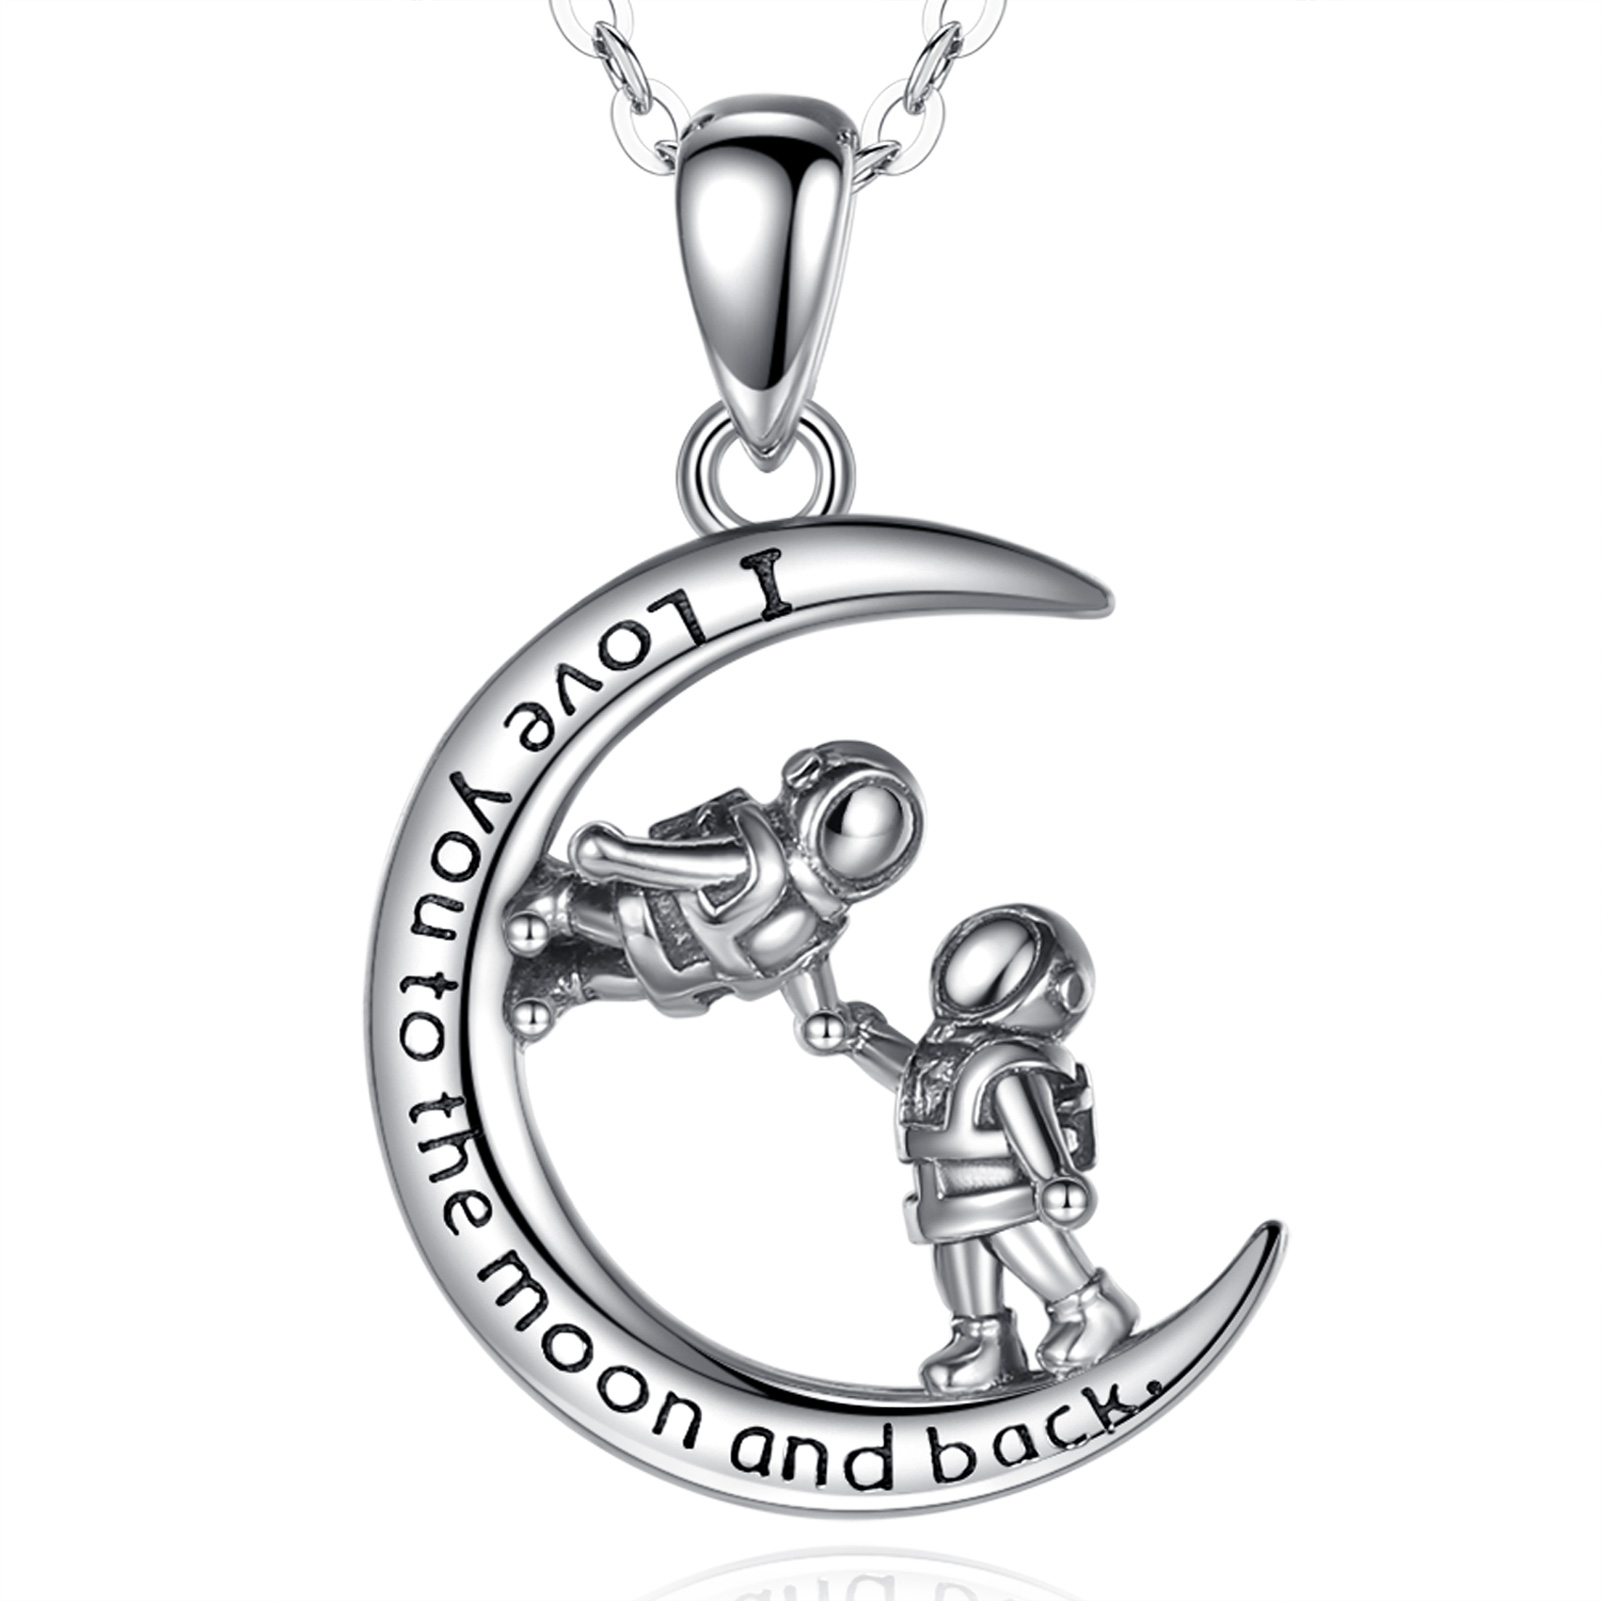 Merryshine Jewelry 925 Sterling Silver Pendant Love you to the moon and back Astronaut Necklace